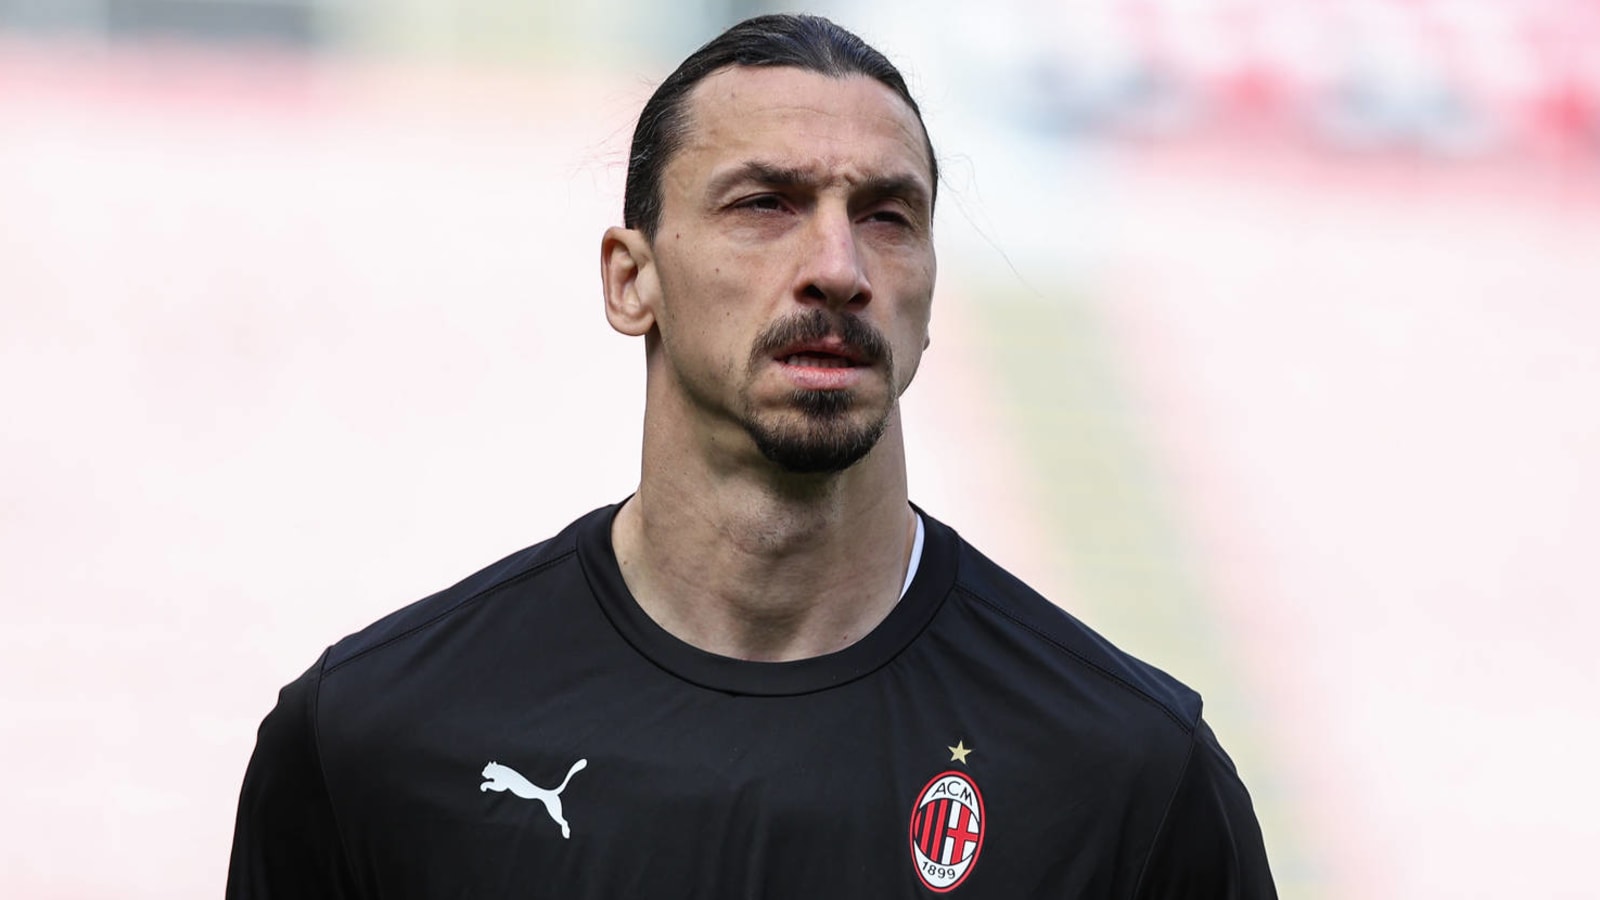 Report: Zlatan Ibrahimovic to sign new deal with AC Milan